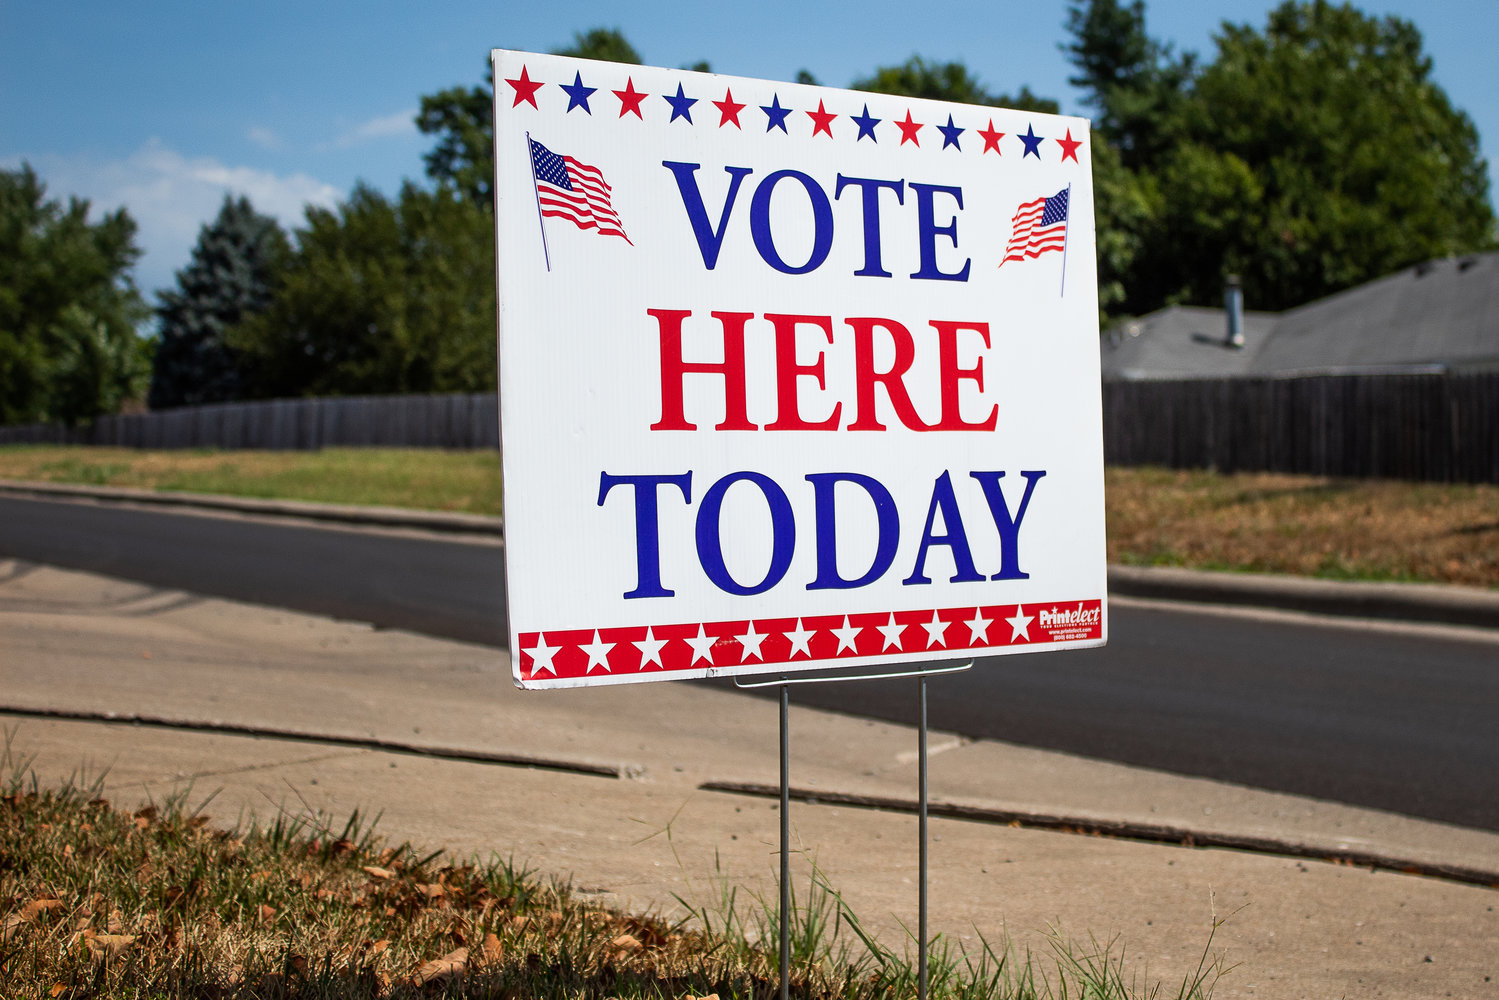 Voters in Missouri head to the polls for primary elections today.